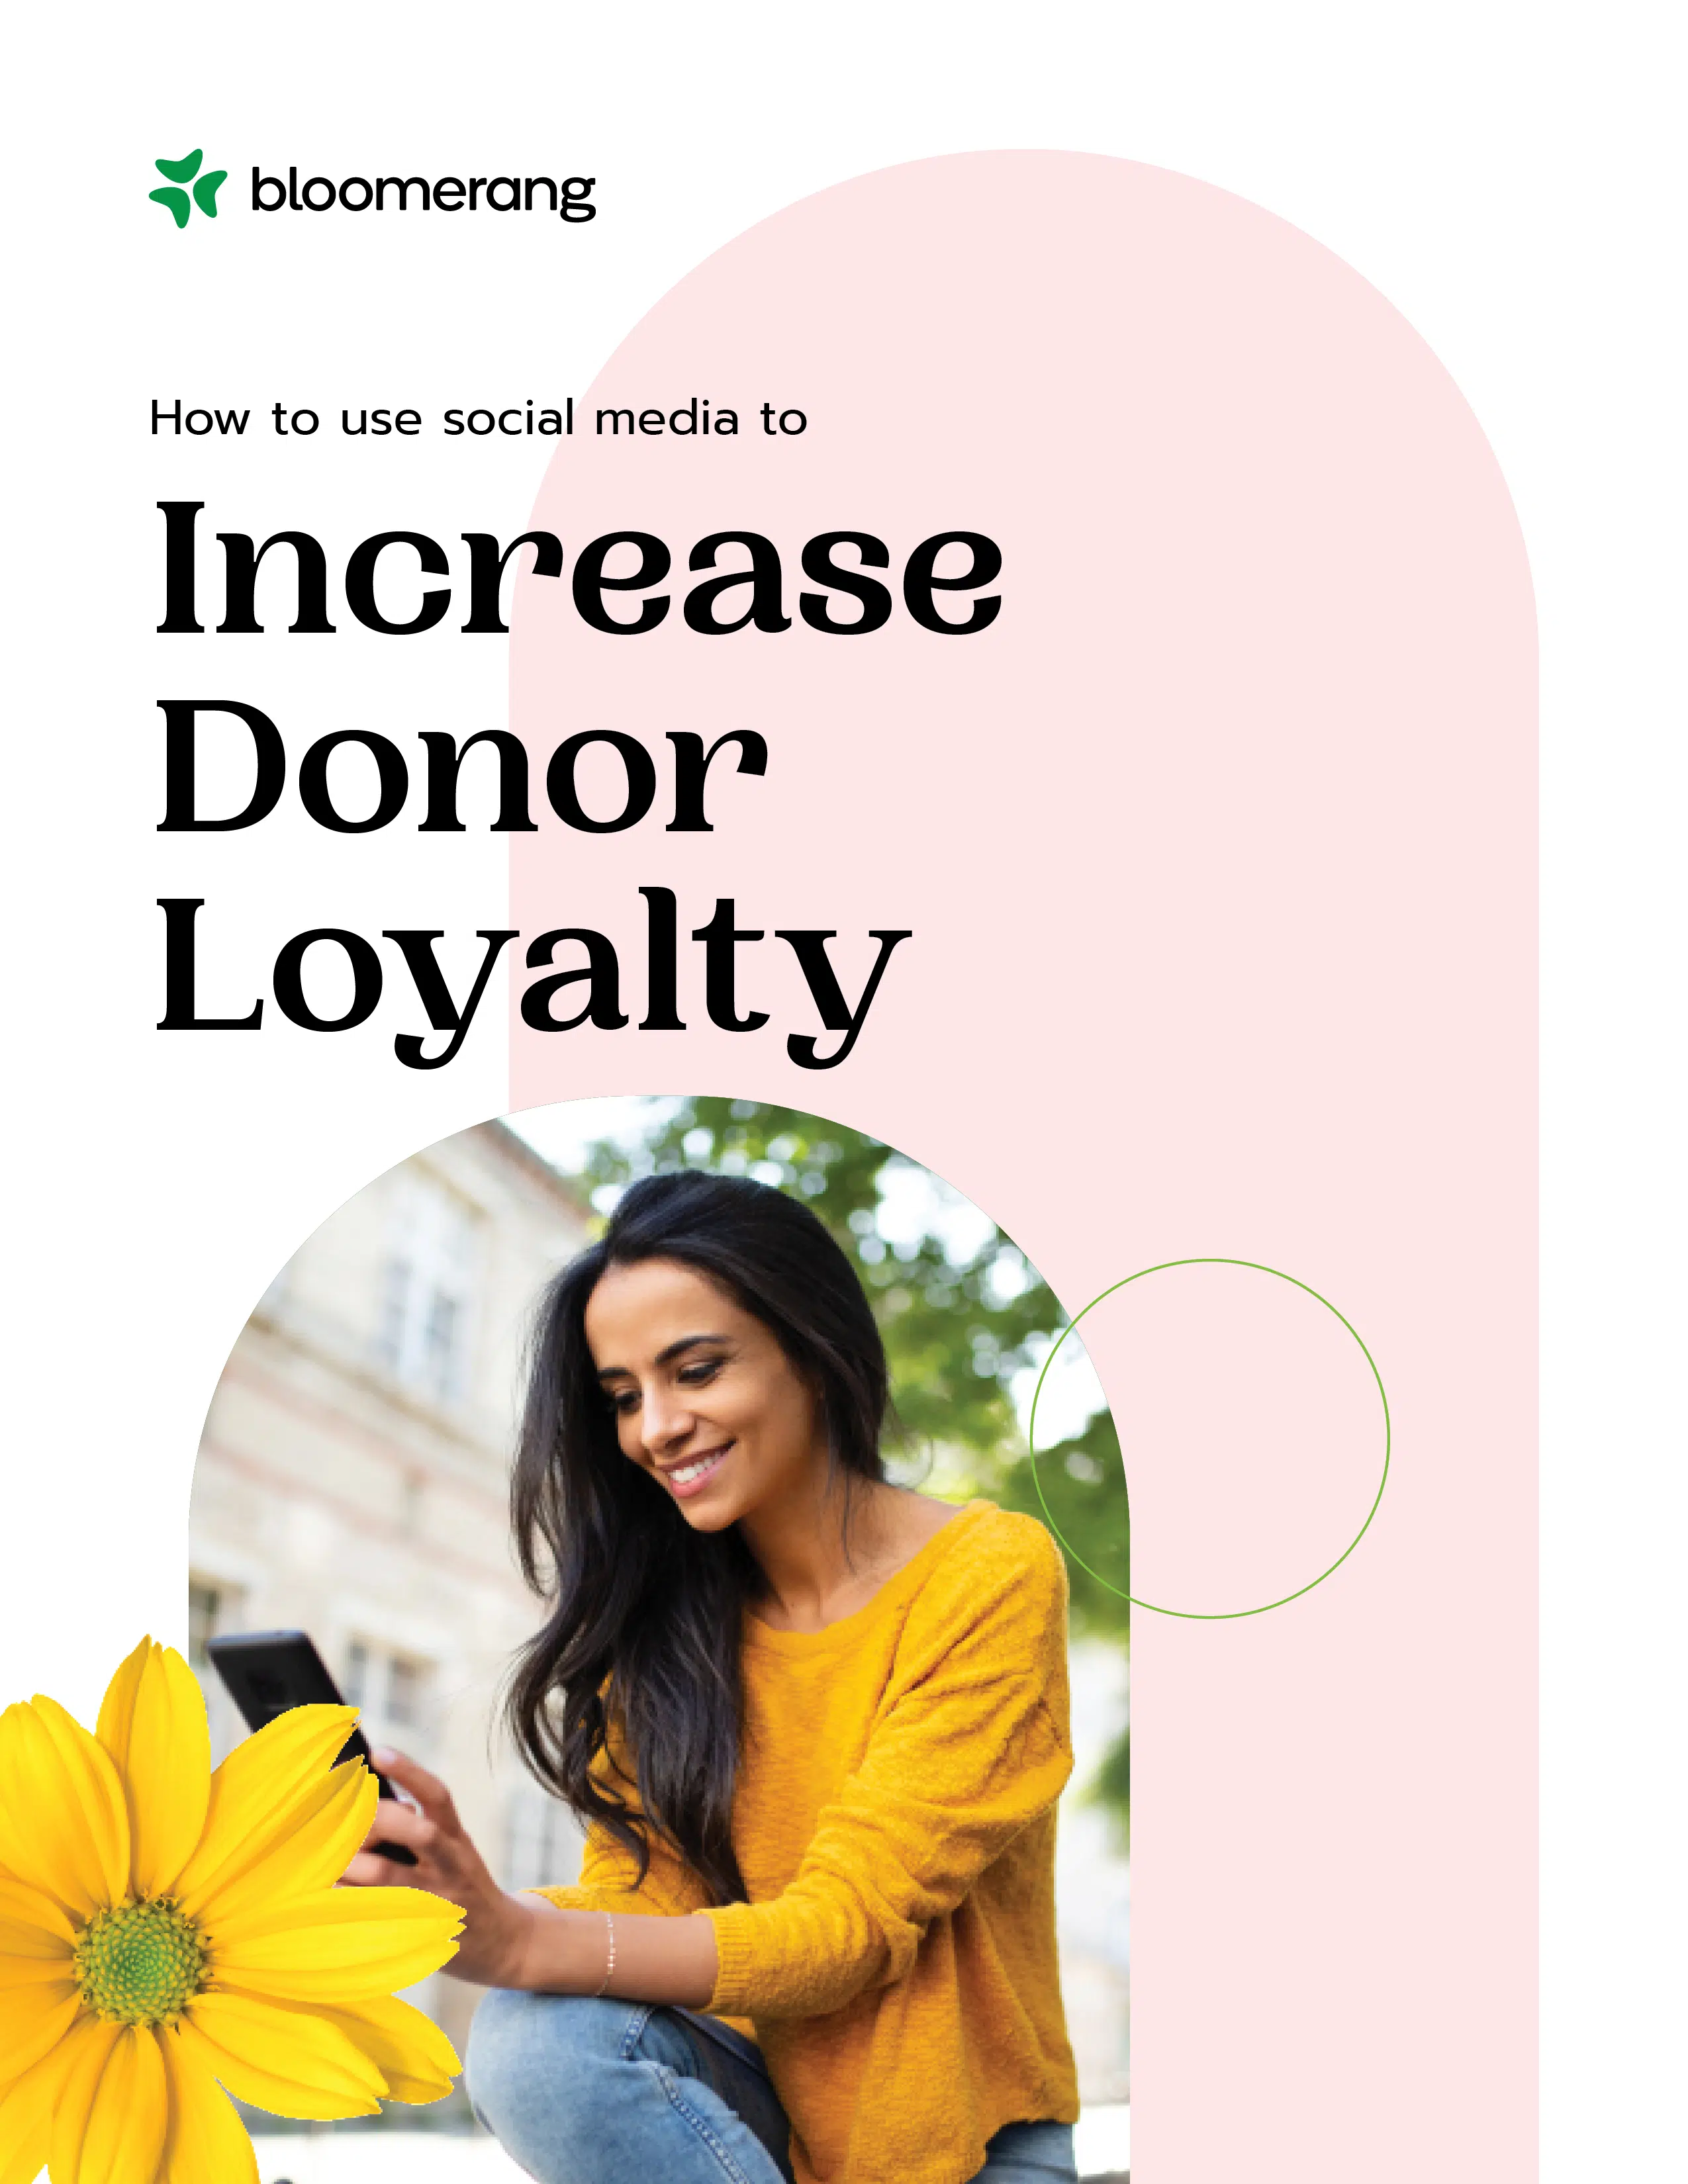 How to Use Social Media to Increase Donor Loyalty Guide Cover